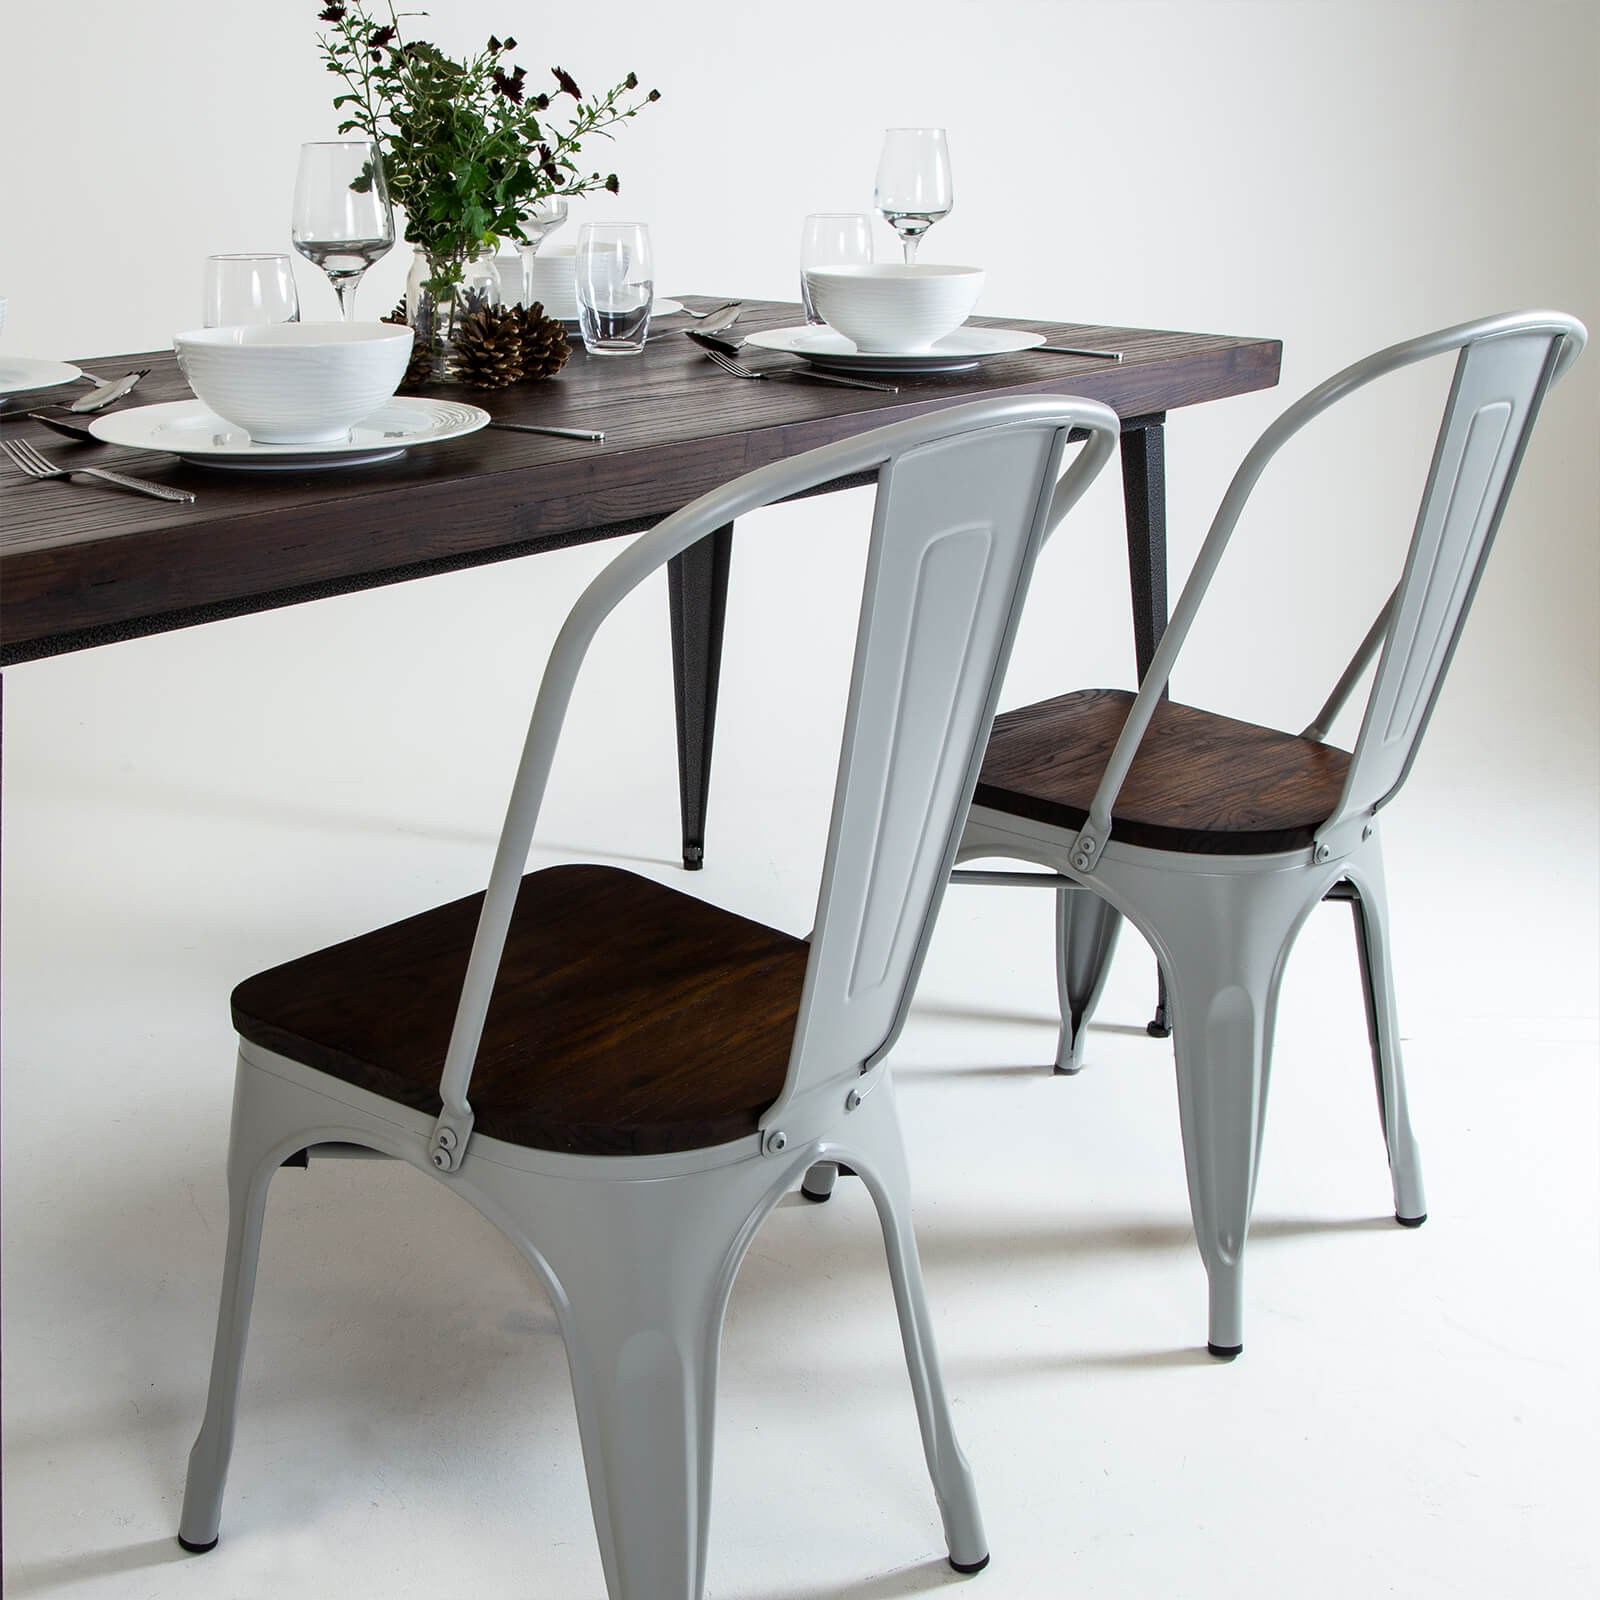 Pair of Metal & Wood Dining Chairs - Light Grey